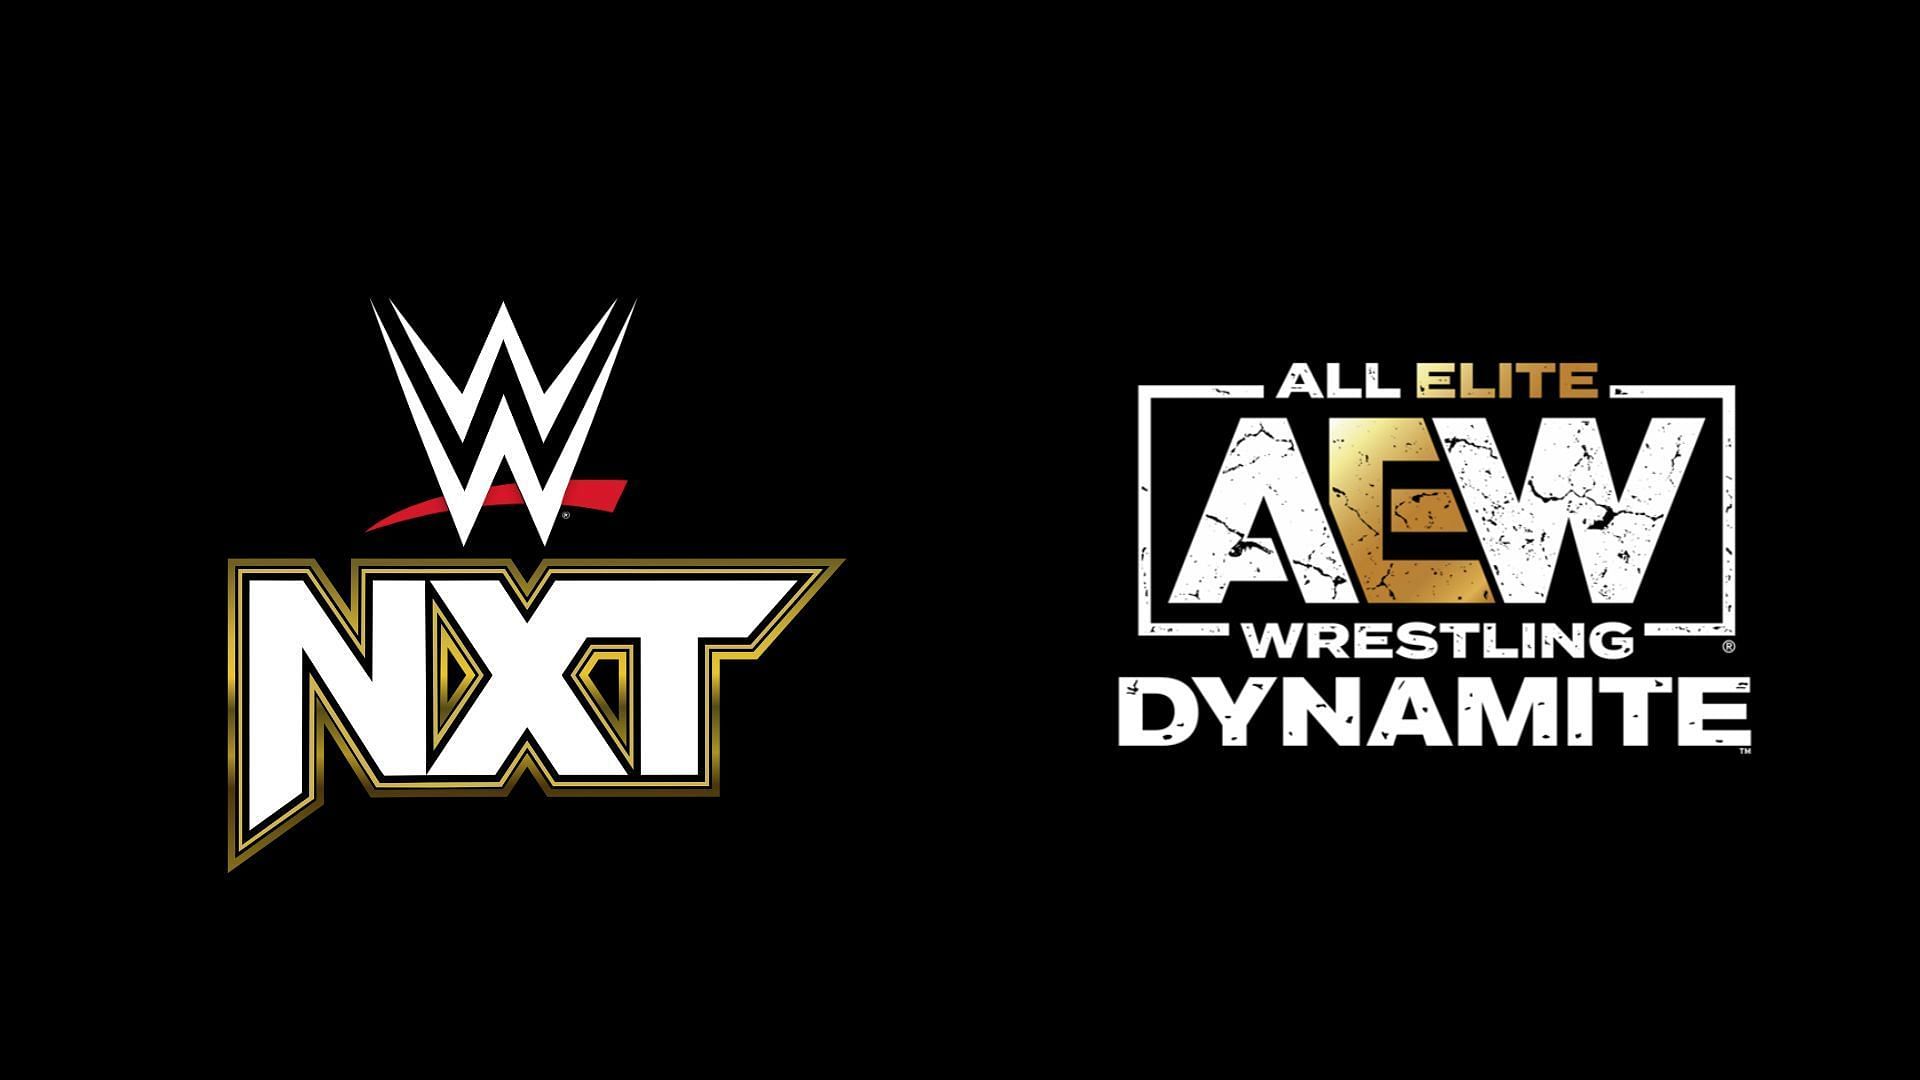  NXT is held on Tuesdays and Dynamite on Wednesdays.